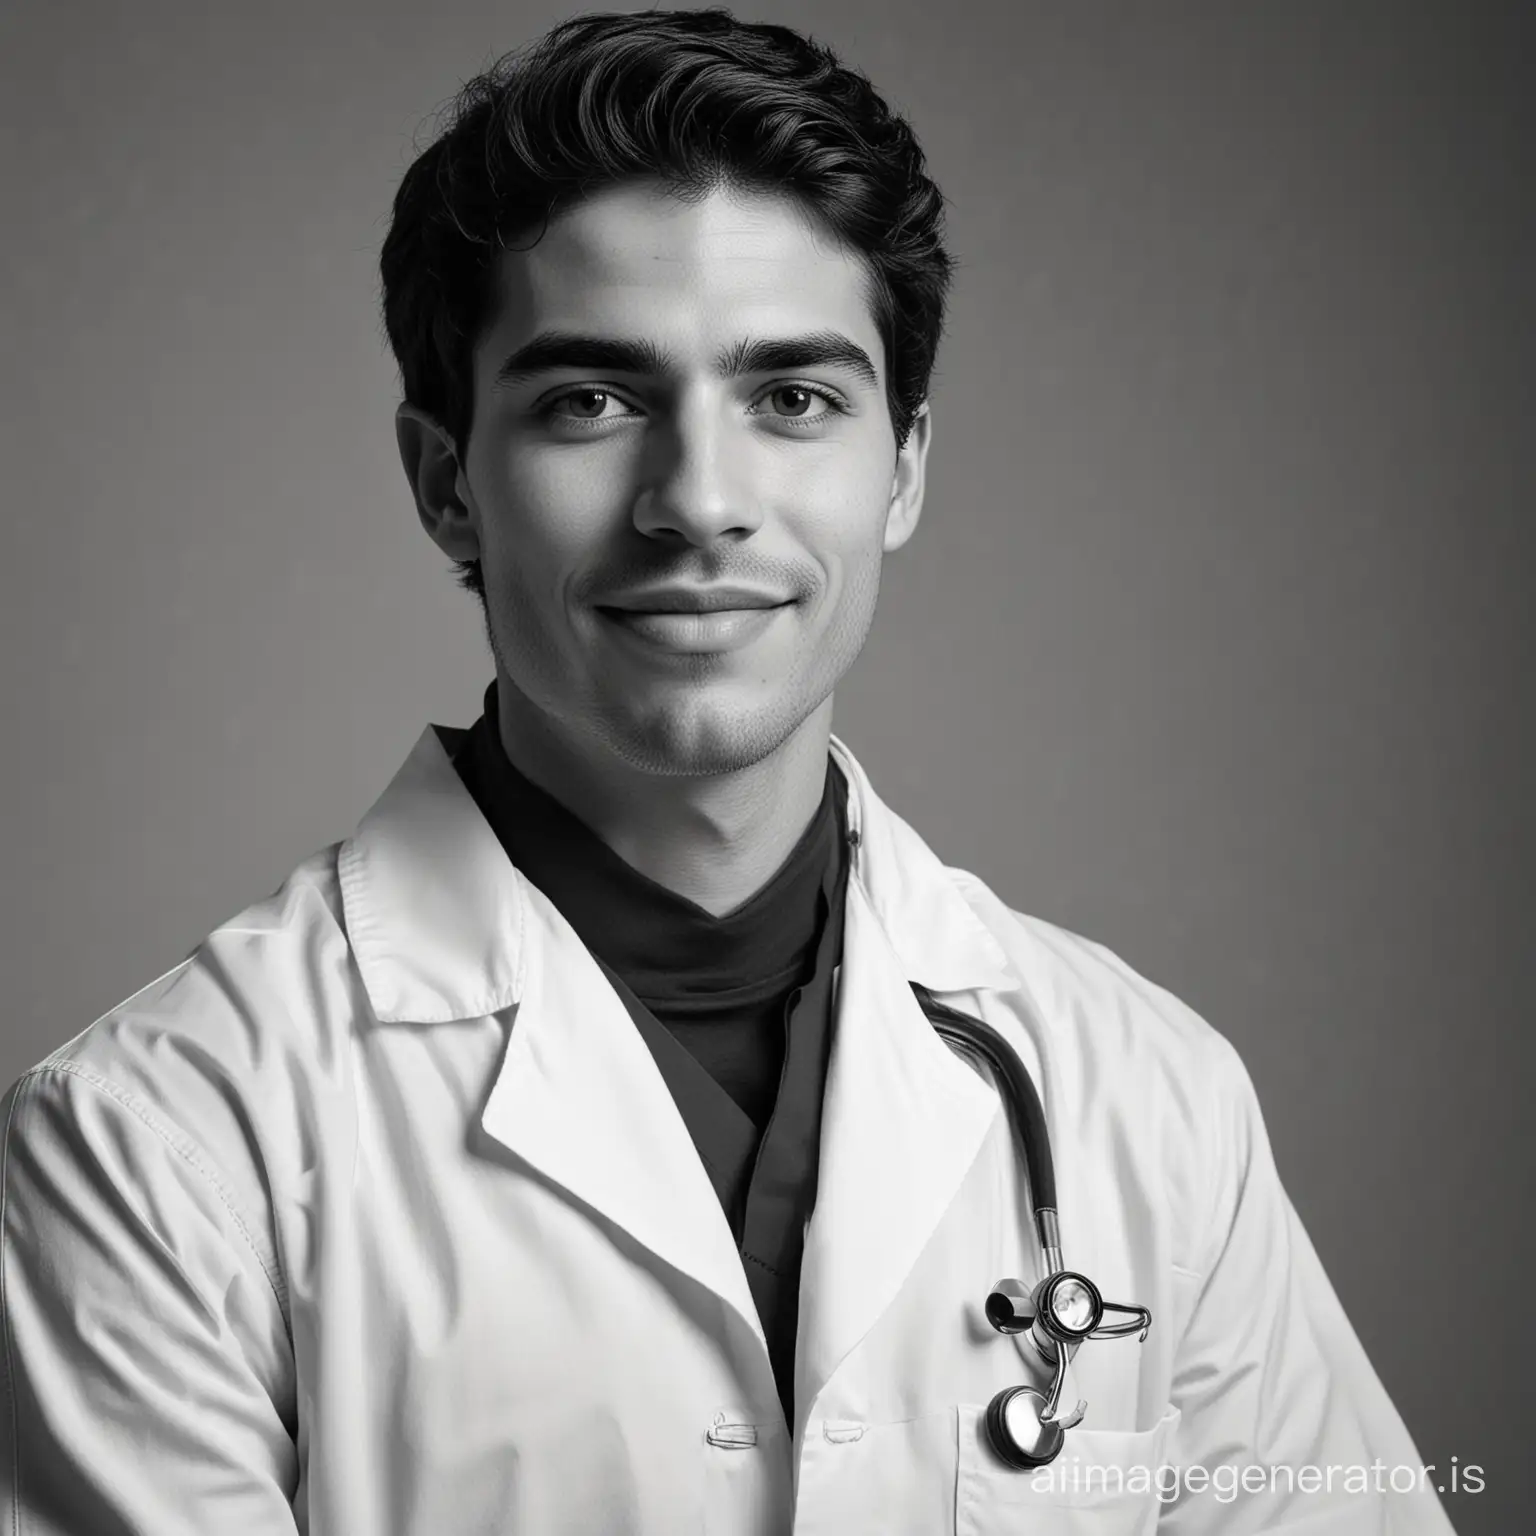 Portuguese-Young-Adult-Male-Medical-Professional-in-Black-and-White